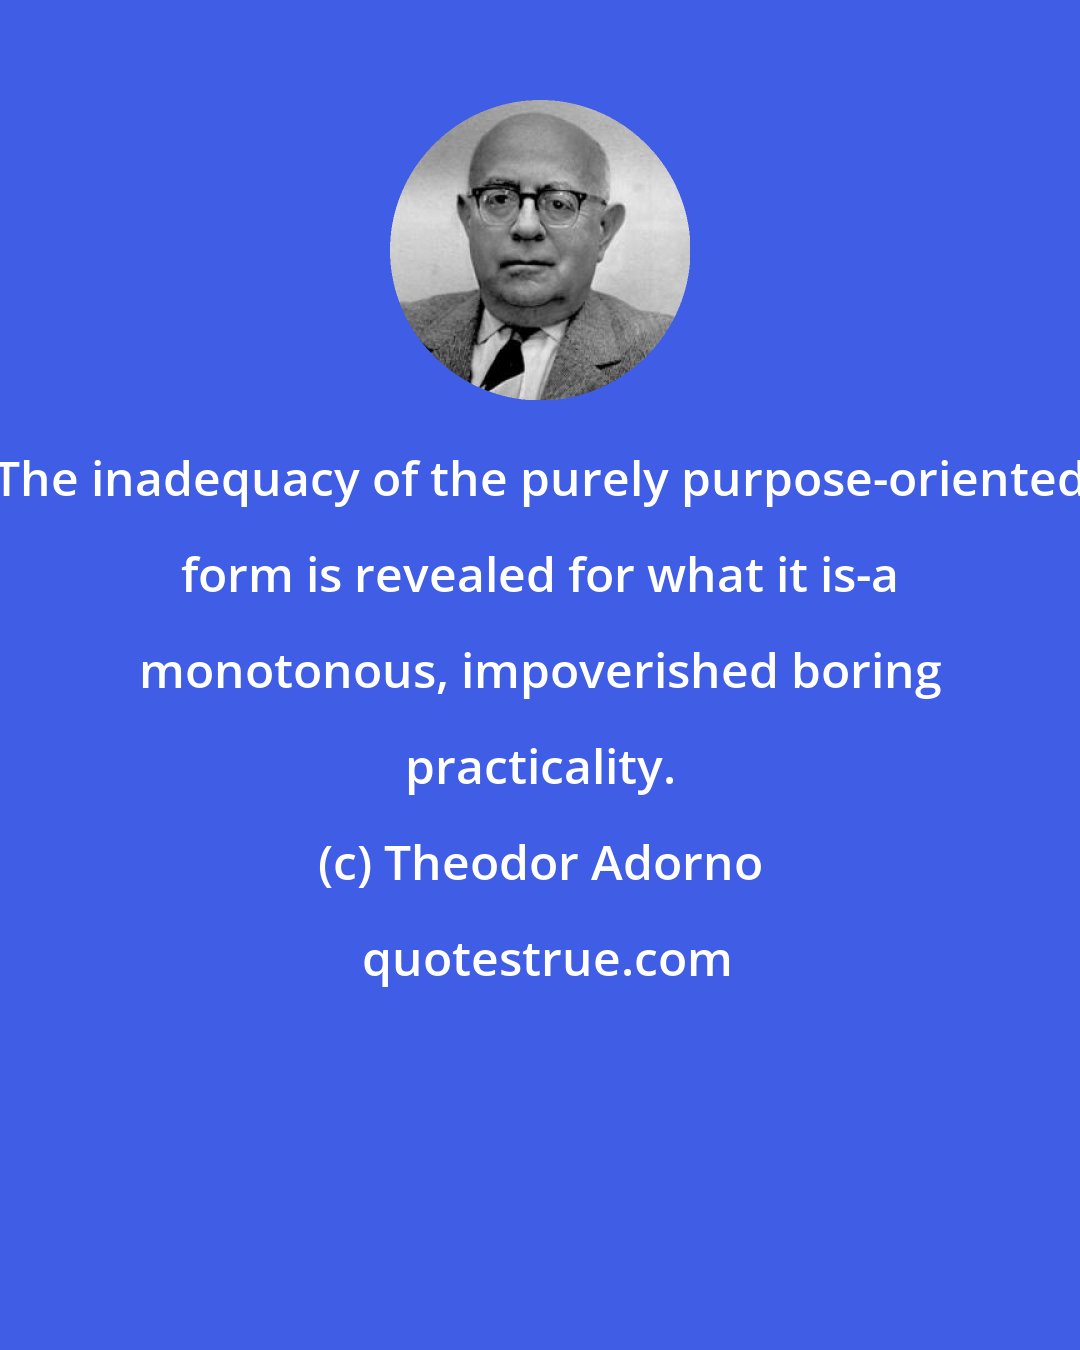 Theodor Adorno: The inadequacy of the purely purpose-oriented form is revealed for what it is-a monotonous, impoverished boring practicality.